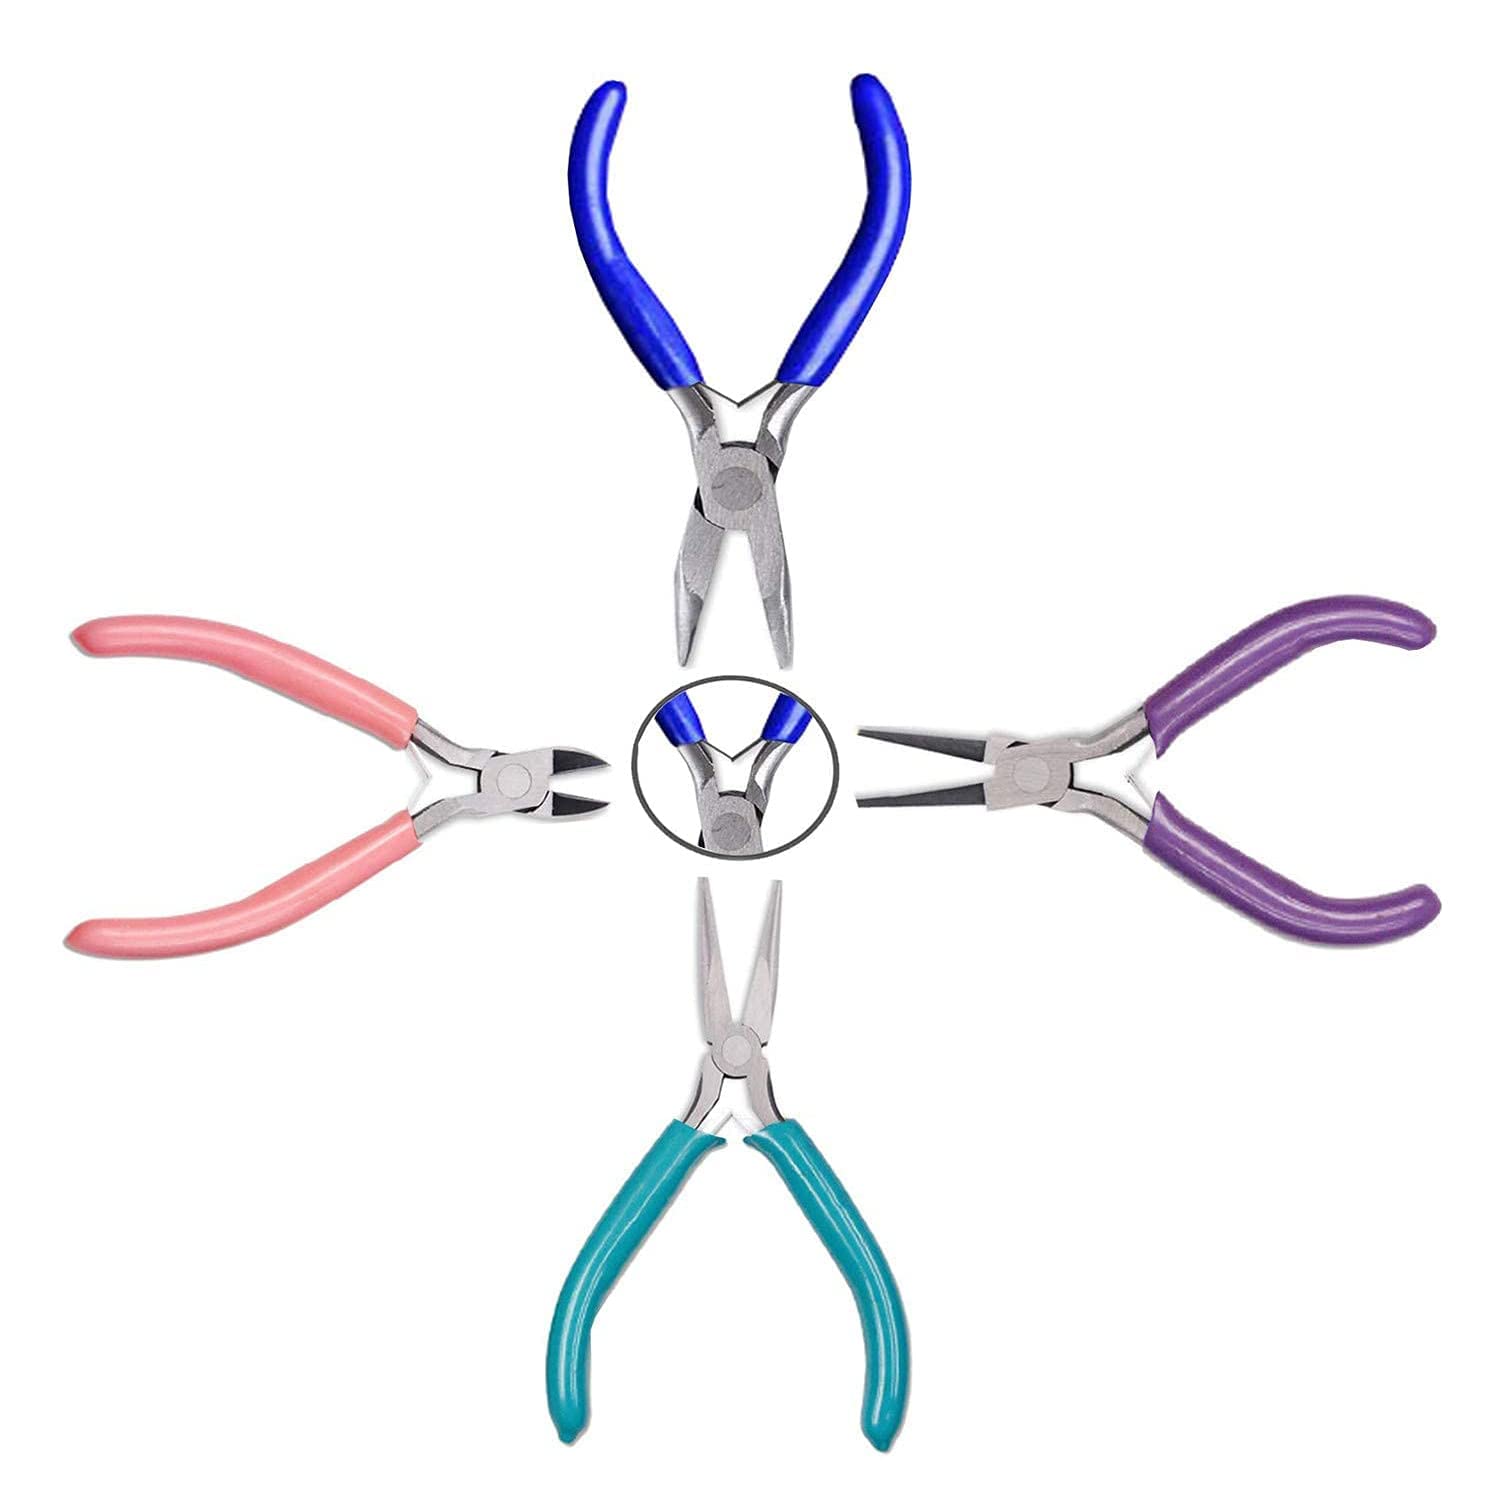 Jewelry Tool Set Round Nose Pliers Flat Nose Pliers Wire 